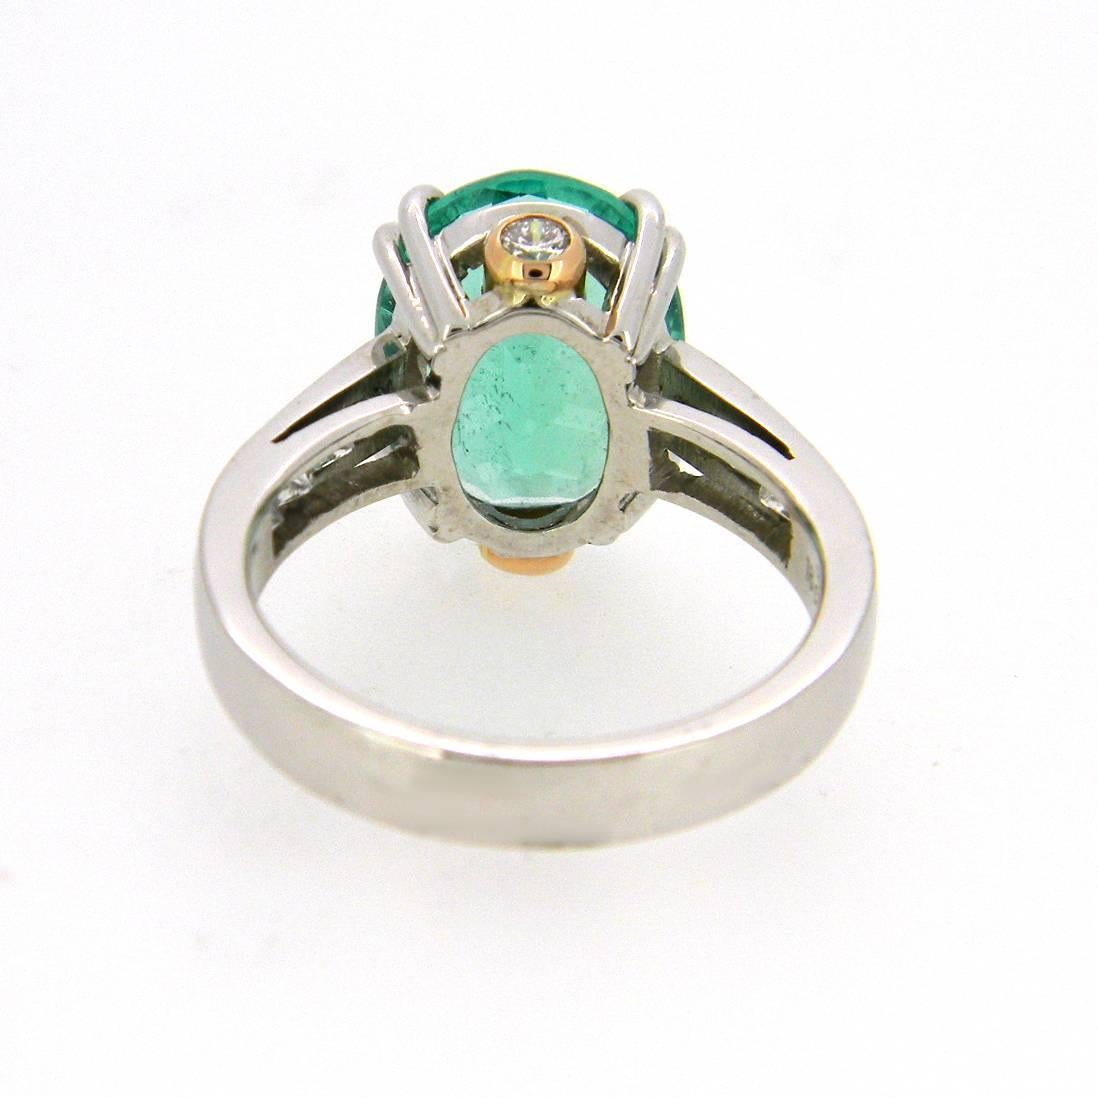 4.66 Carat Emerald Diamond White and Rose Gold Ring In New Condition For Sale In Toorak, Victoria